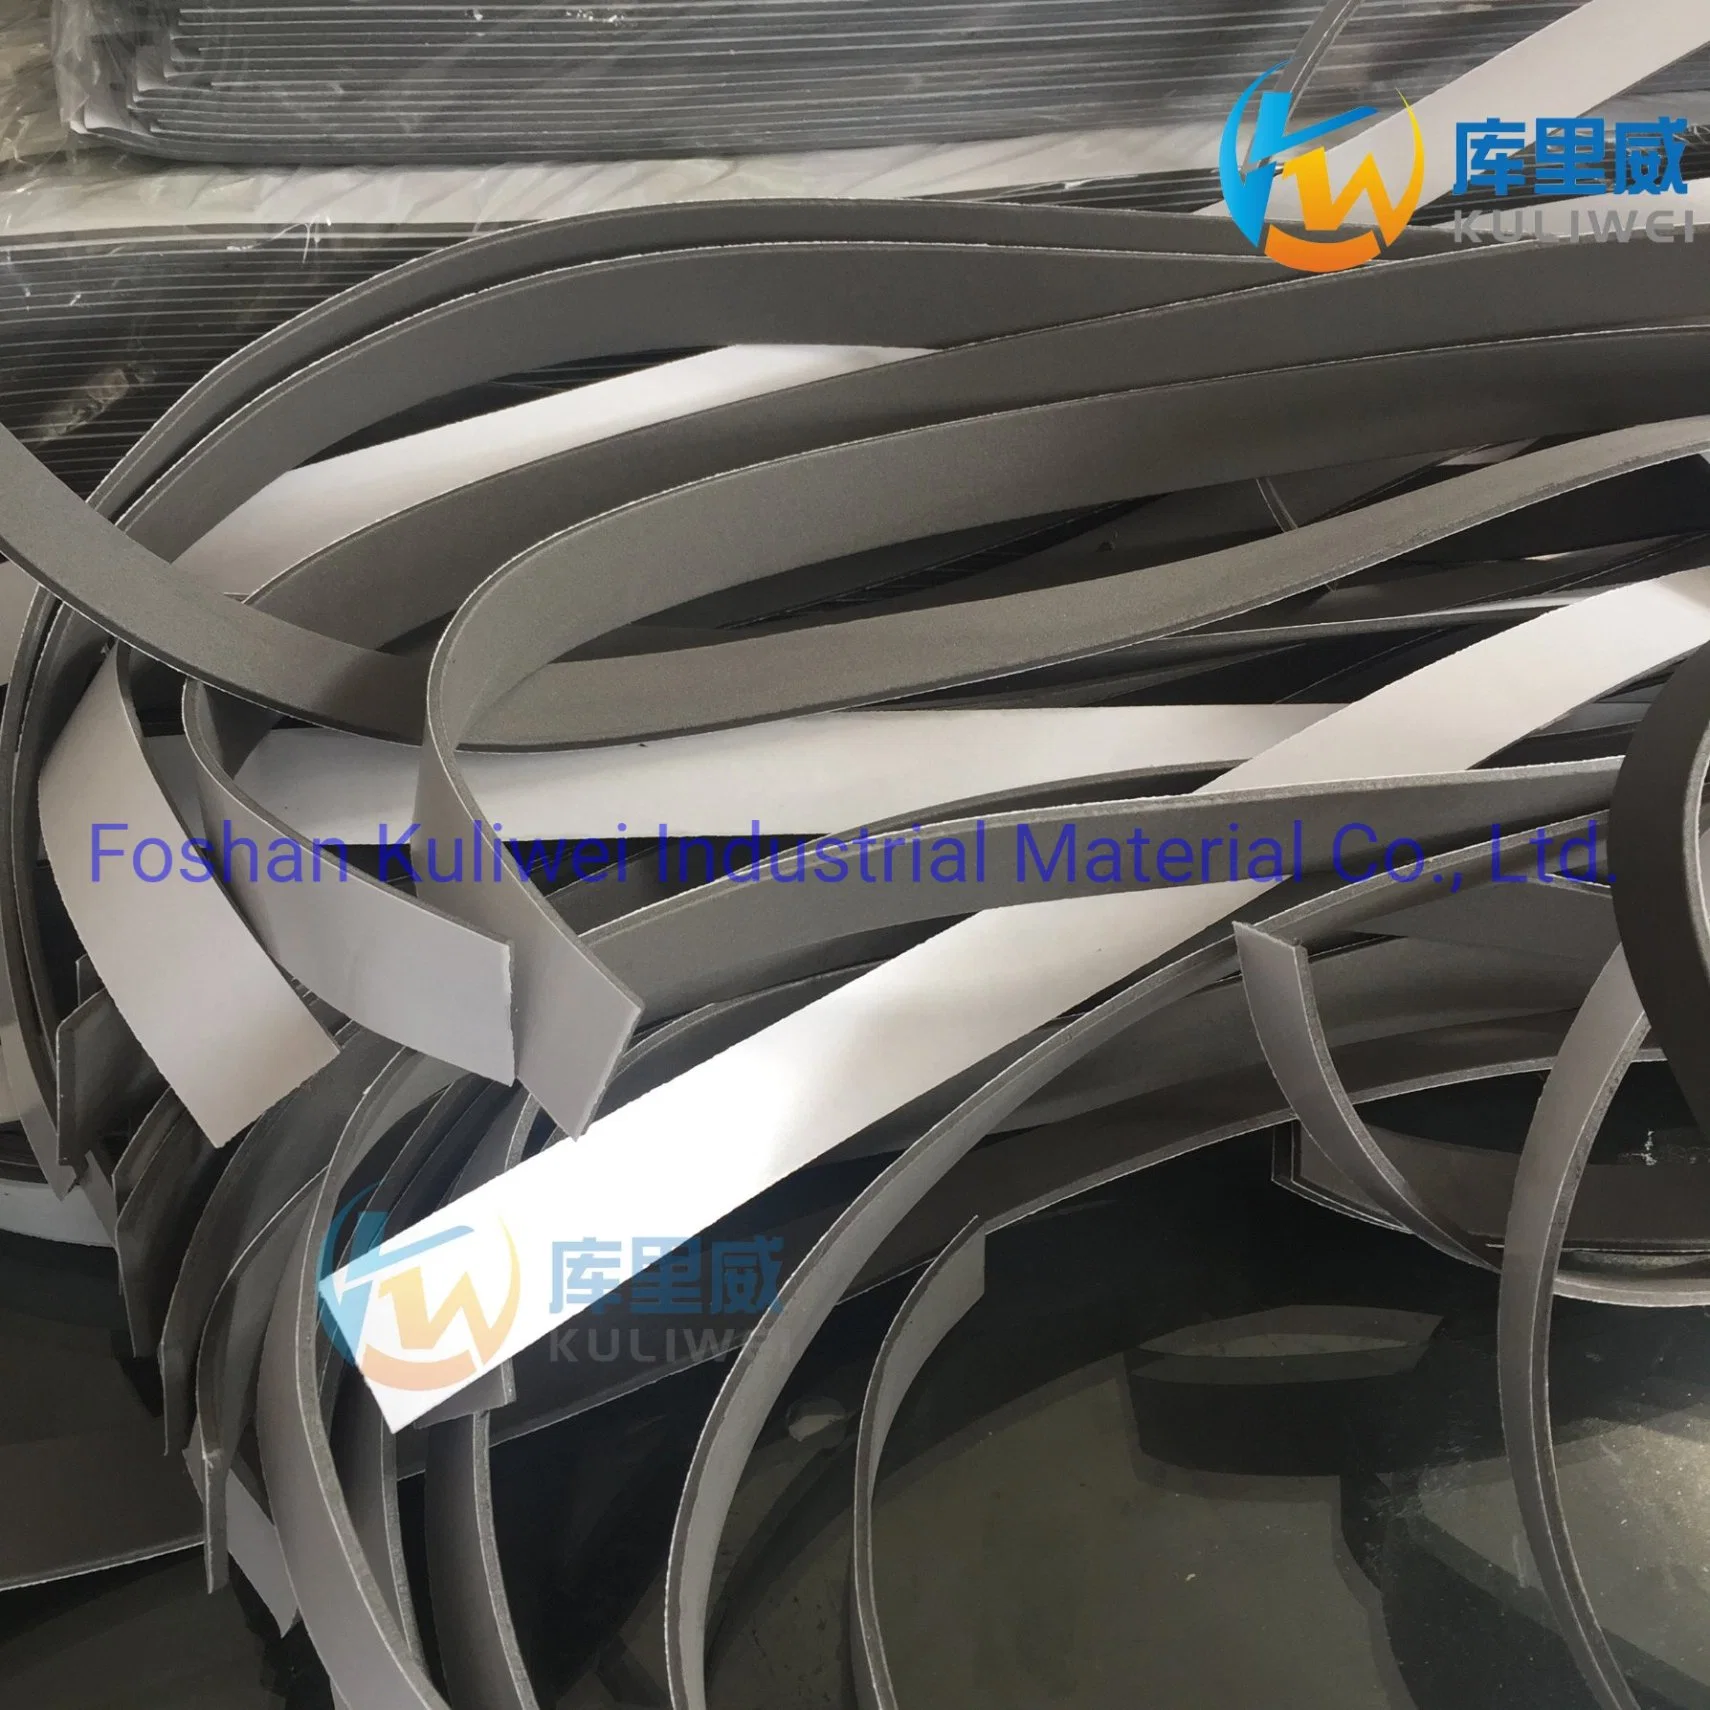 Round Cr Foamed Rubber Seal Strip Closed Cell Window or Door Adhesive Foam Sealing Strip Self Adhesive Cr/NBR/EPDM Foam Strips Weather-Strip Foam Tape